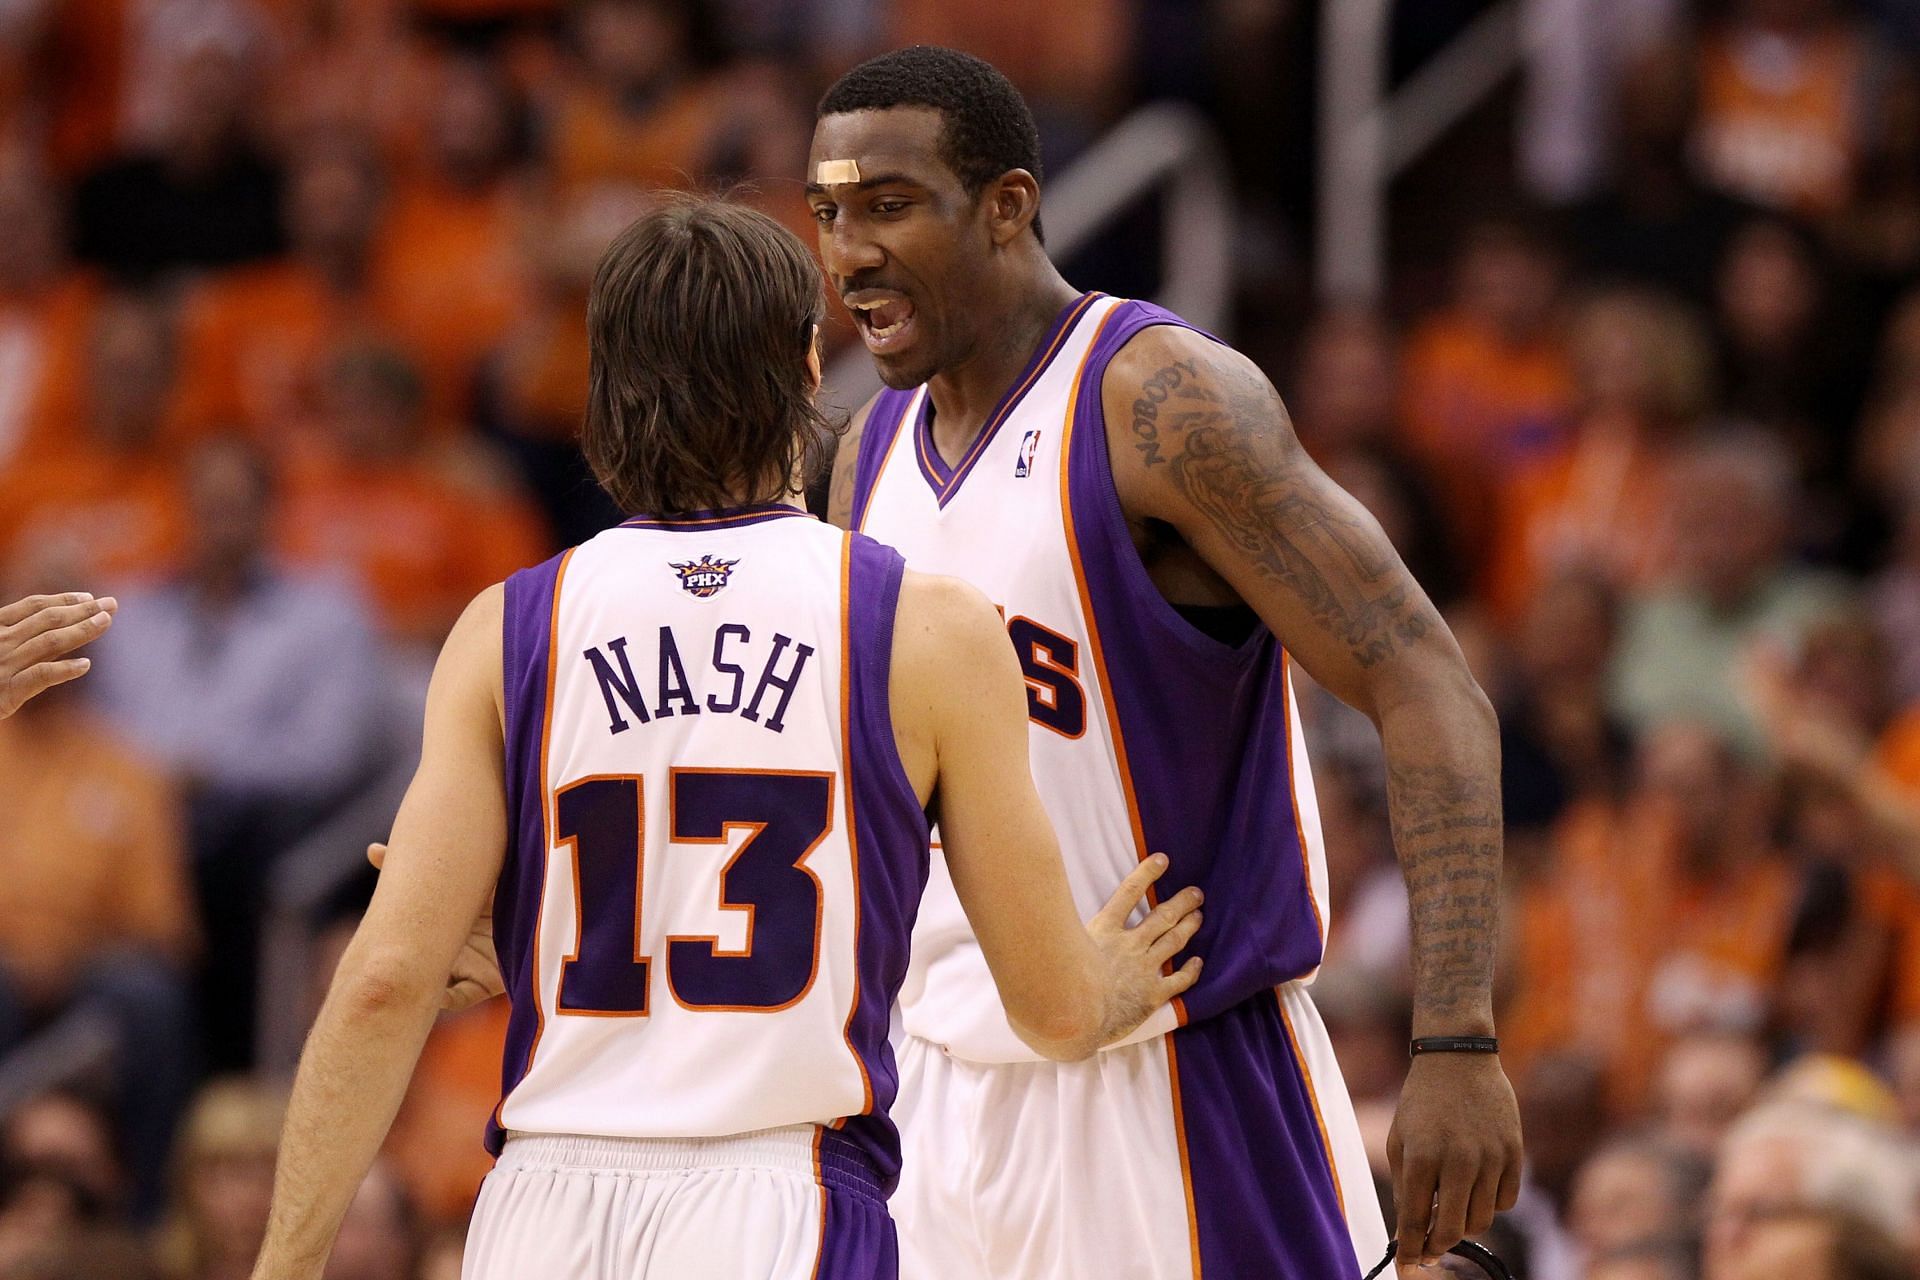 Steve Nash, Devin Booker and more: Ranking the top 5 draft picks in the history of the Phoenix Suns